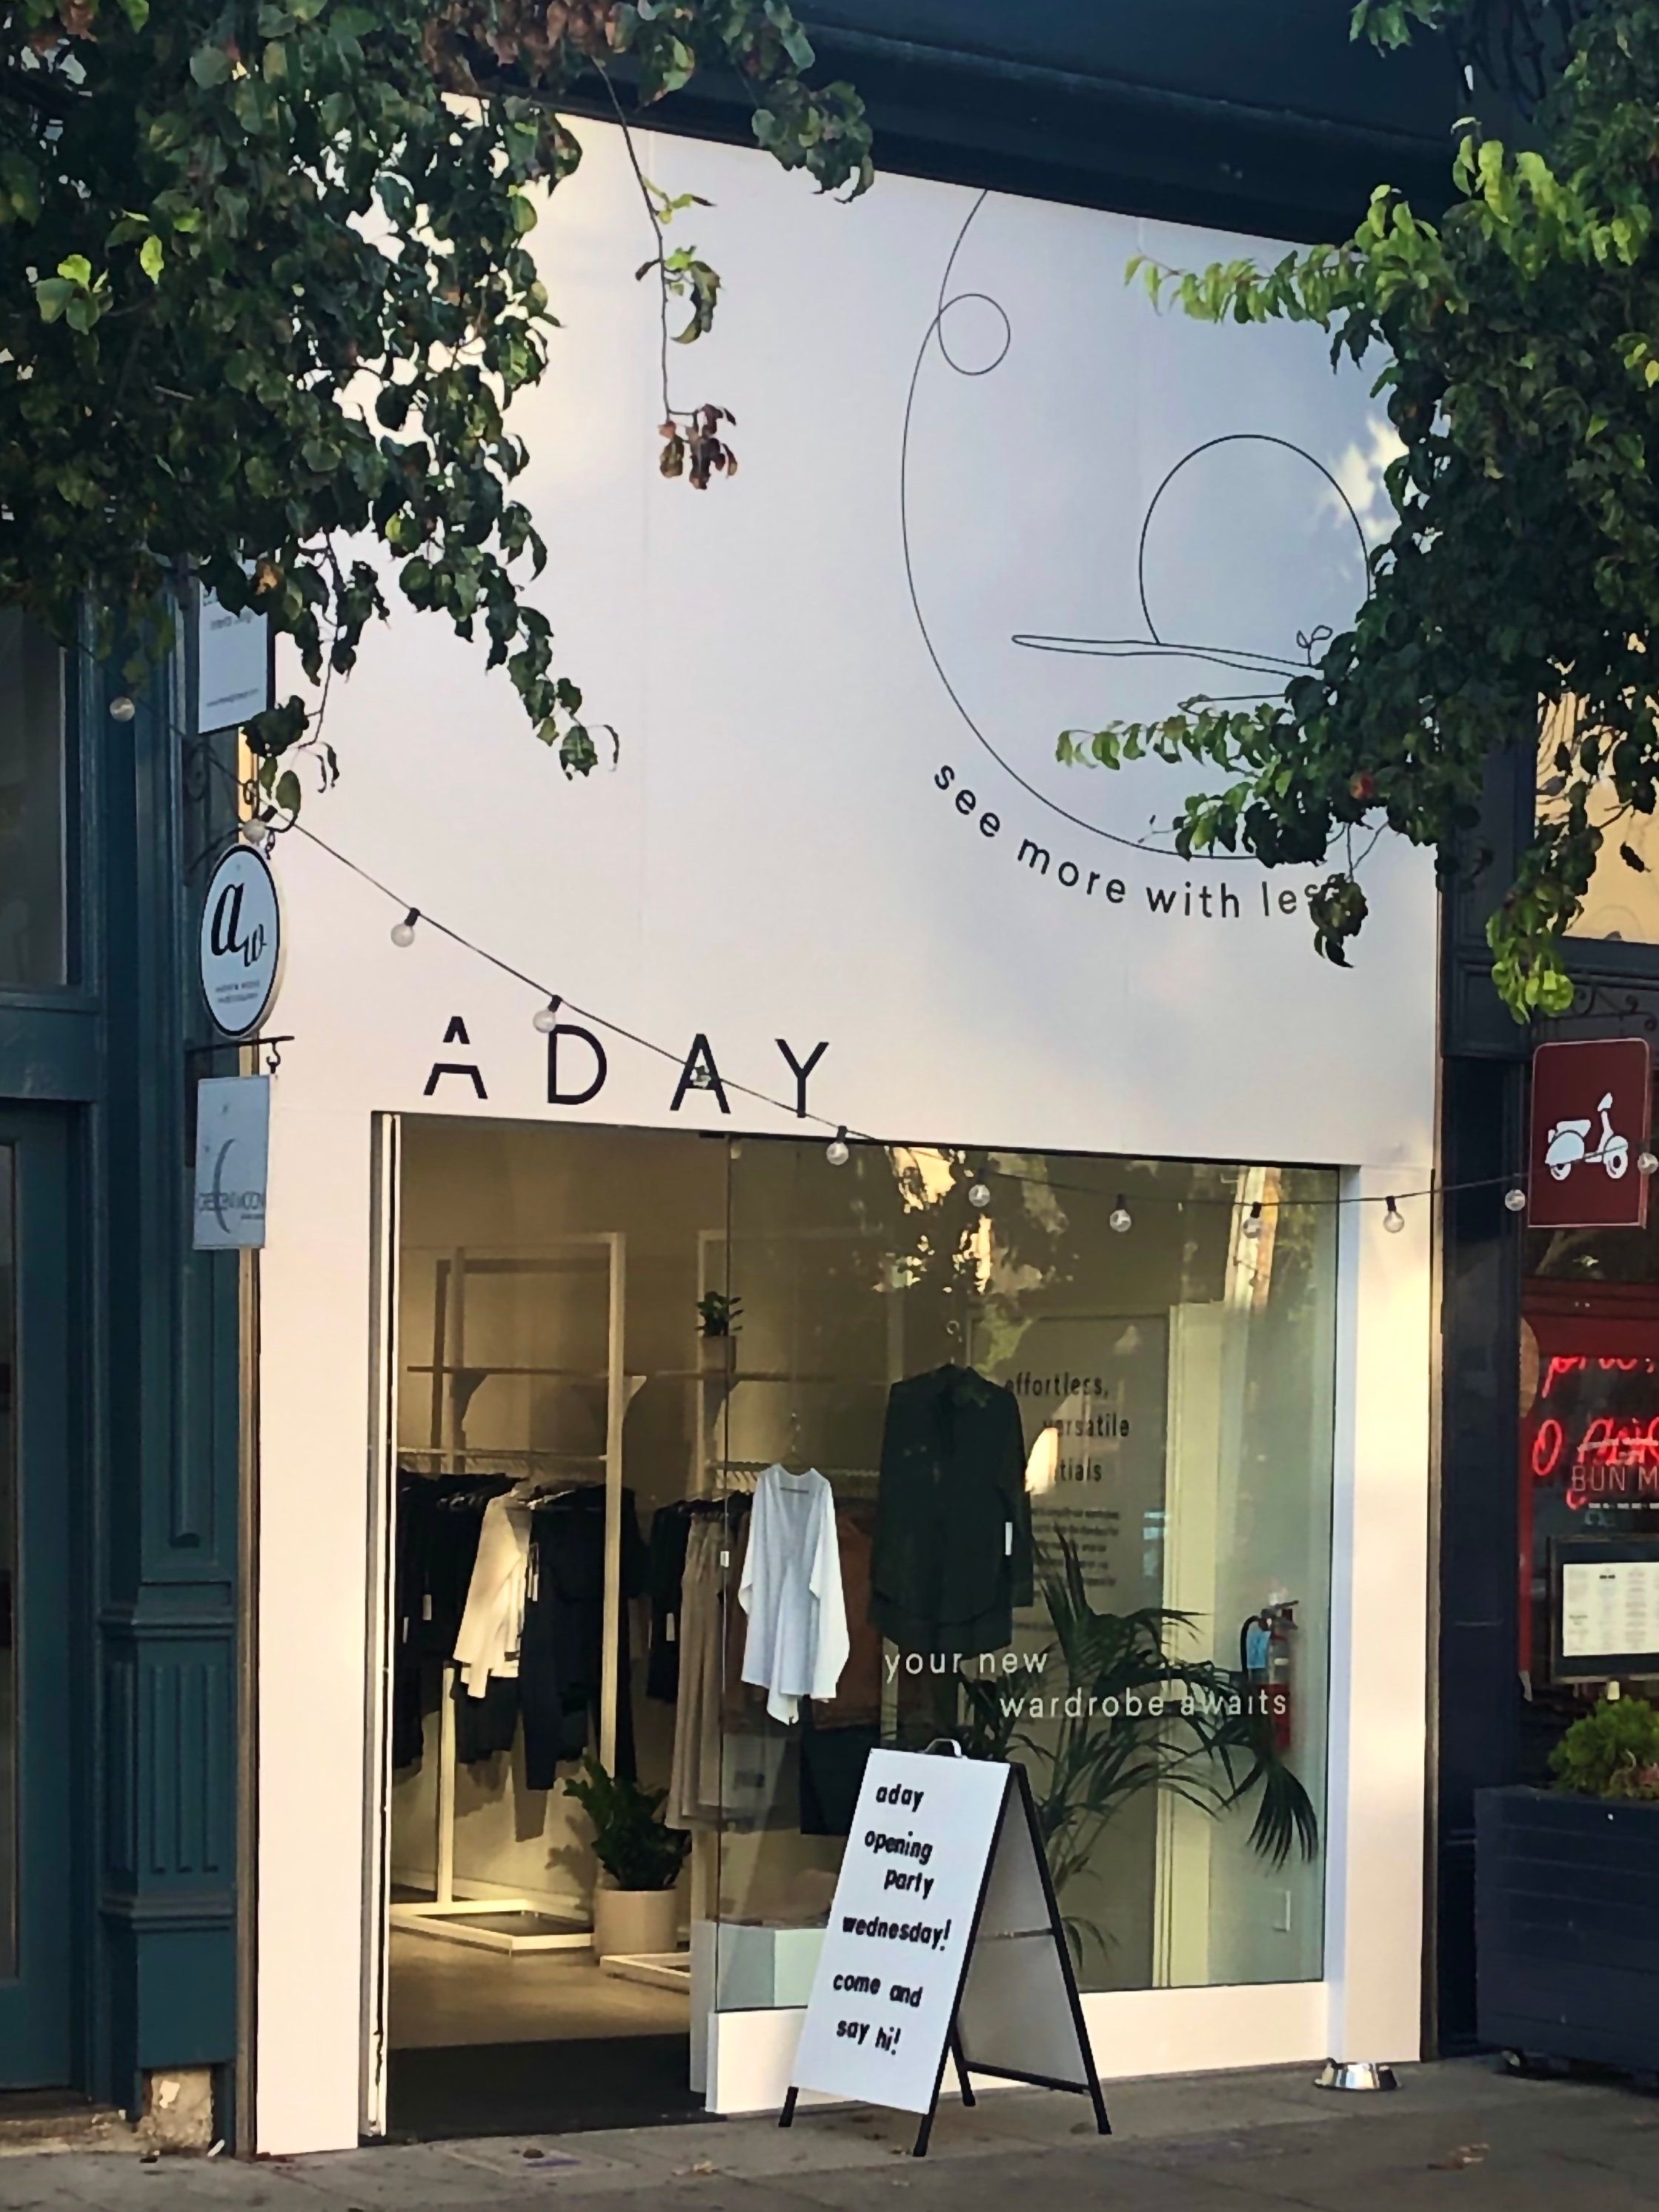 Aday opens its first shop on SF's Fillmore Street + more style scoop - 7x7  Bay Area